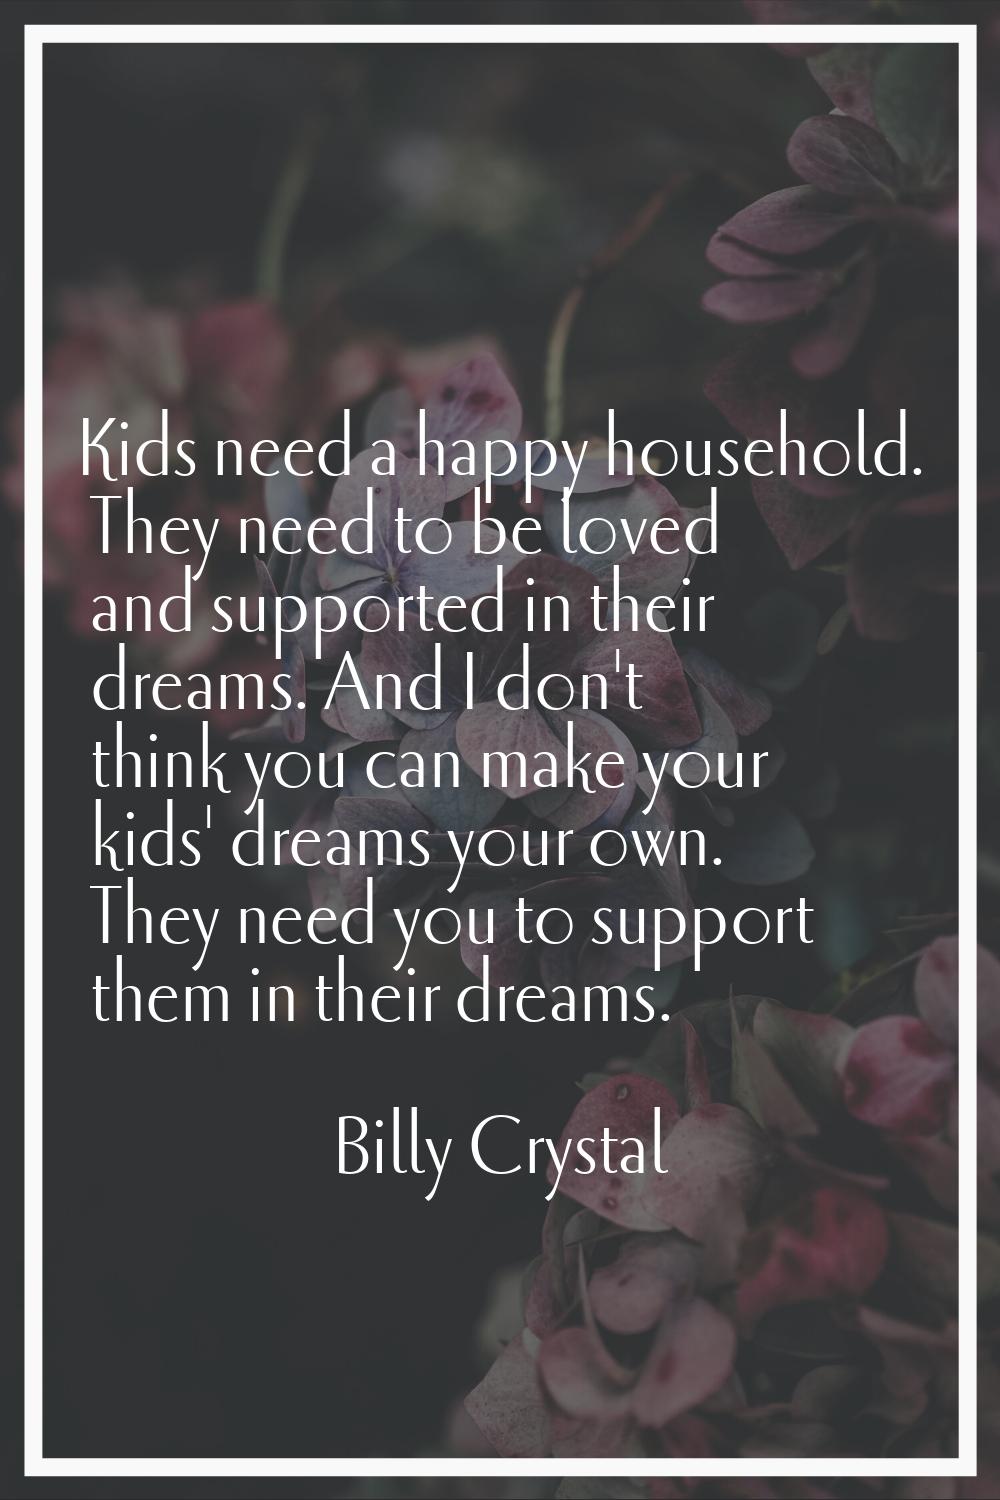 Kids need a happy household. They need to be loved and supported in their dreams. And I don't think